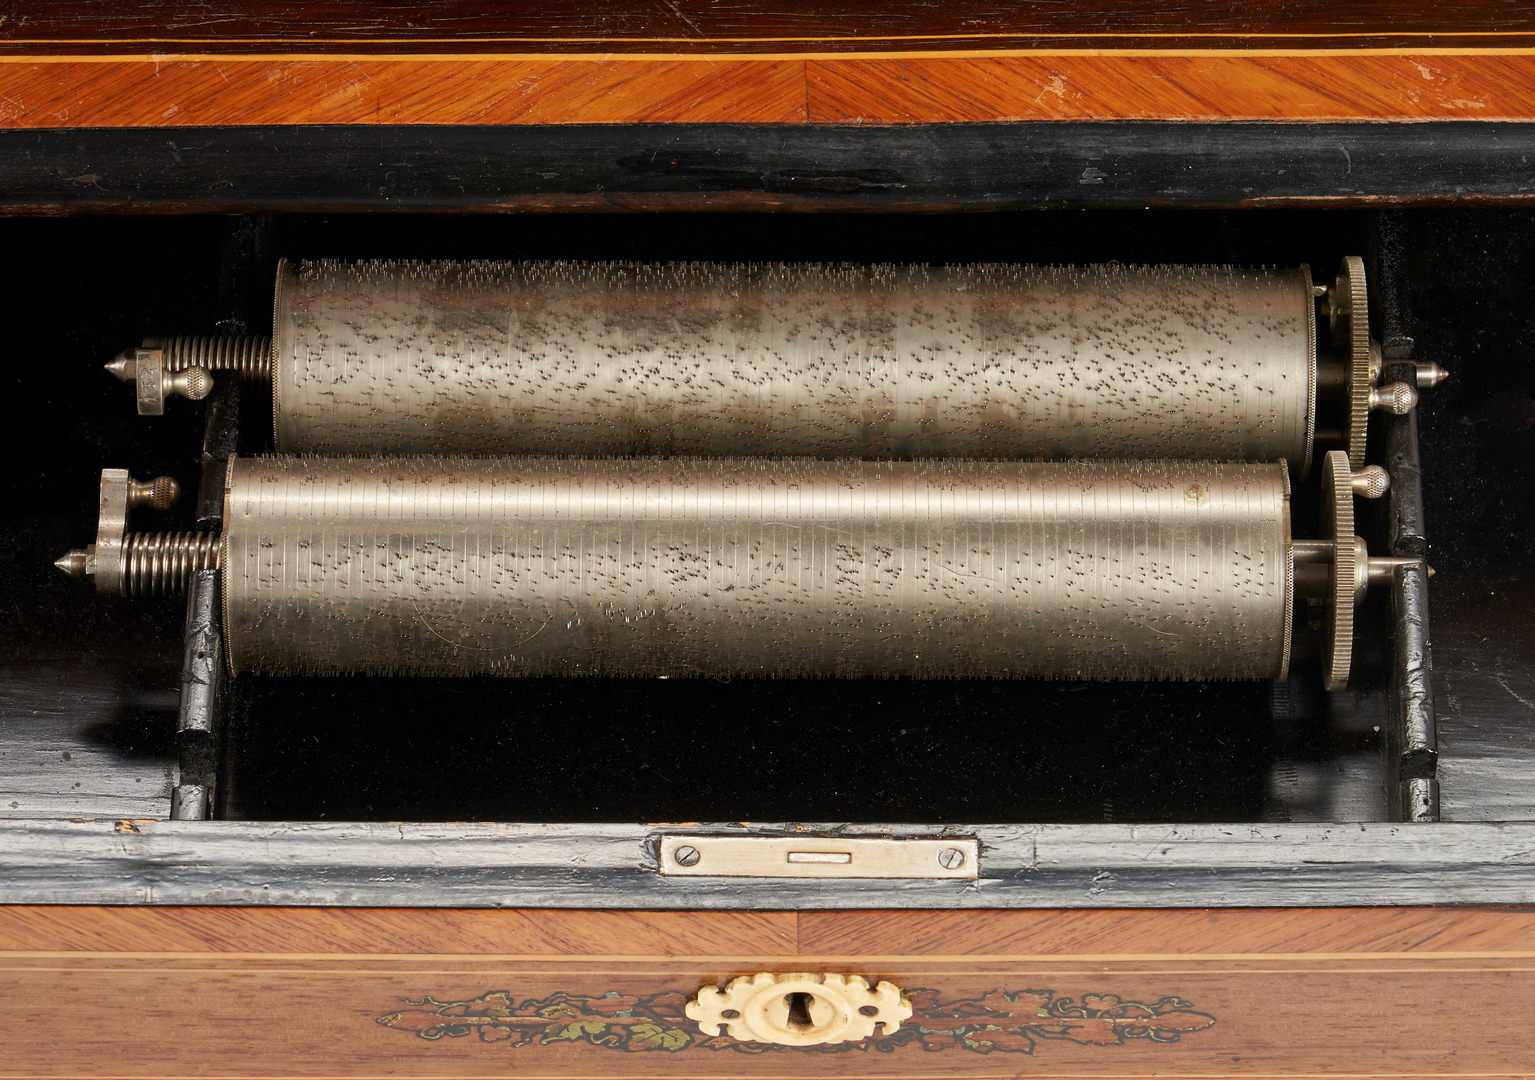 Lot 645: Swiss Marquetry Cylinder Music Box